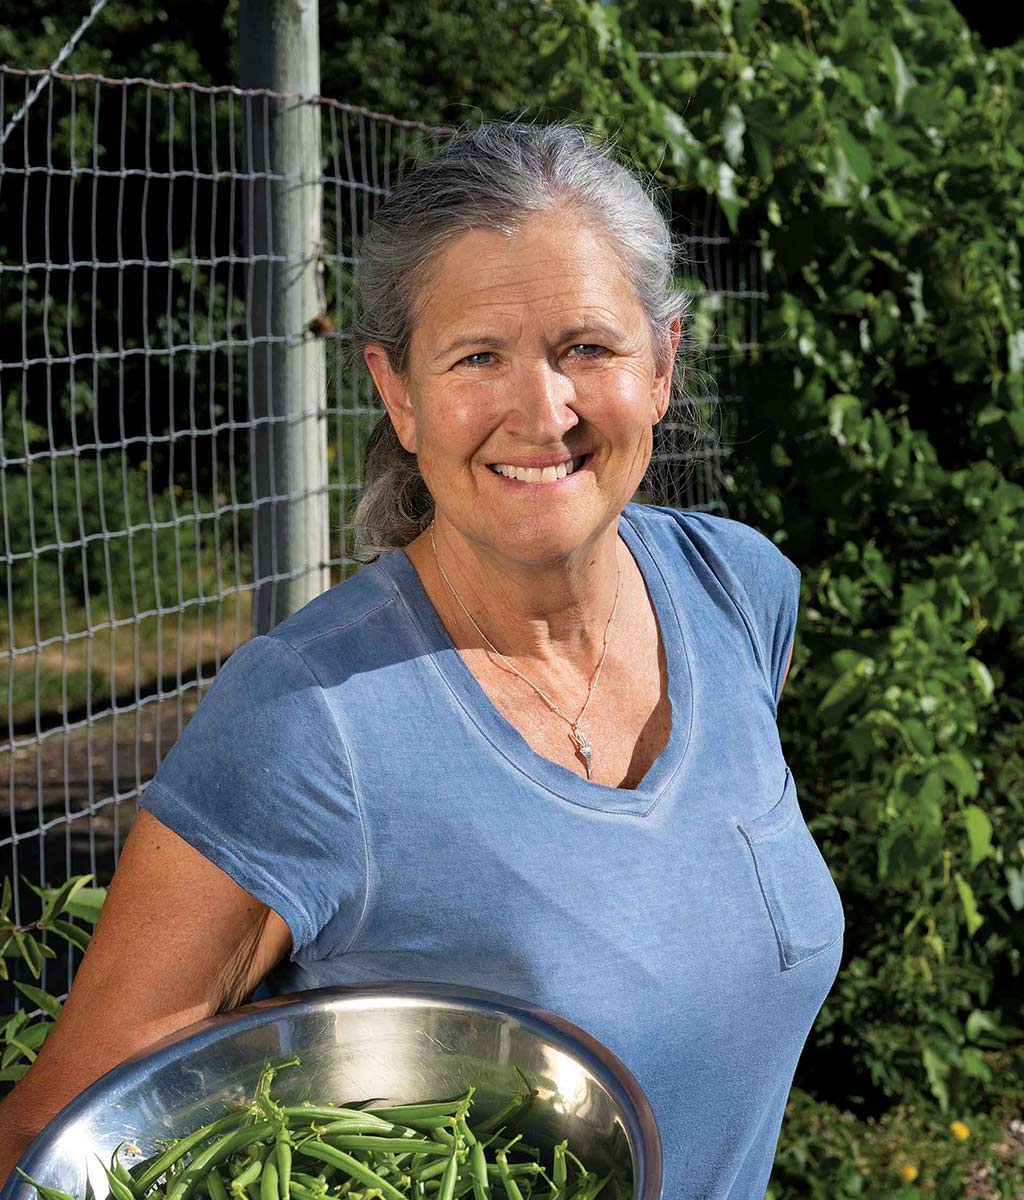 woman smiling with metal bowl of green beans in arm